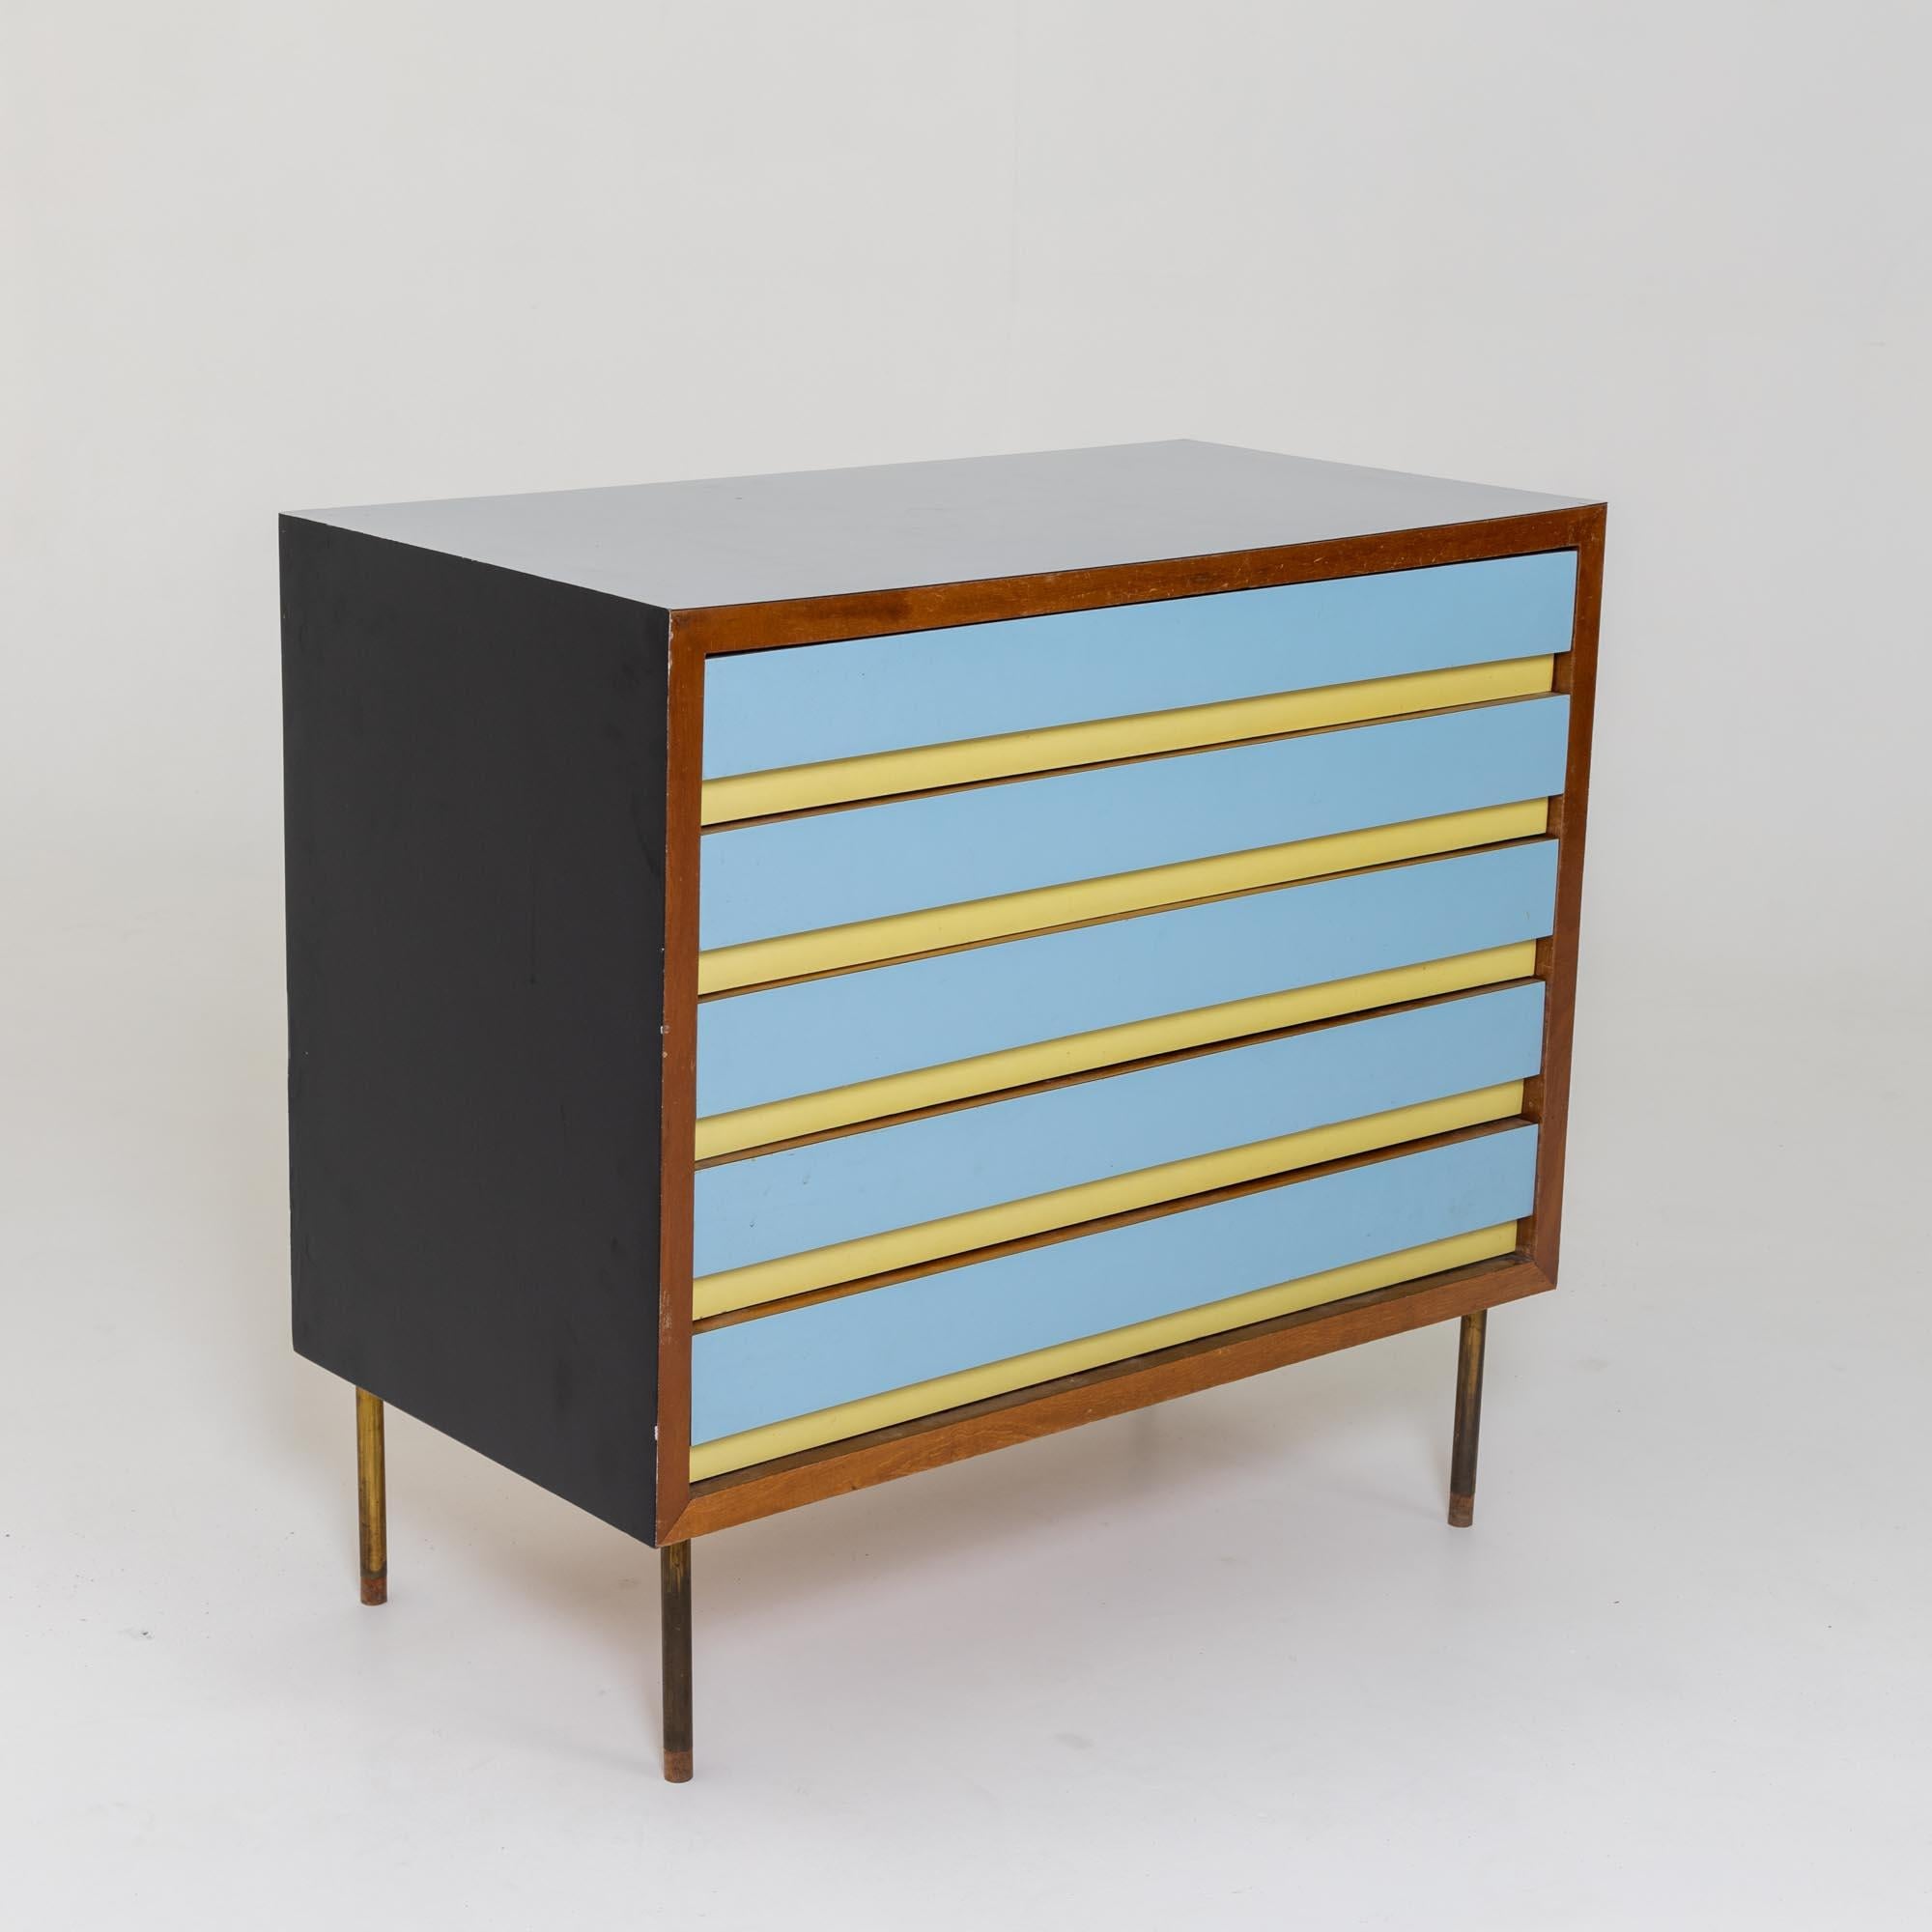 Small chest of drawers with five drawers on conical brass legs. The surfaces are light blue and the fronts of the drawers are set off in light blue and yellow.